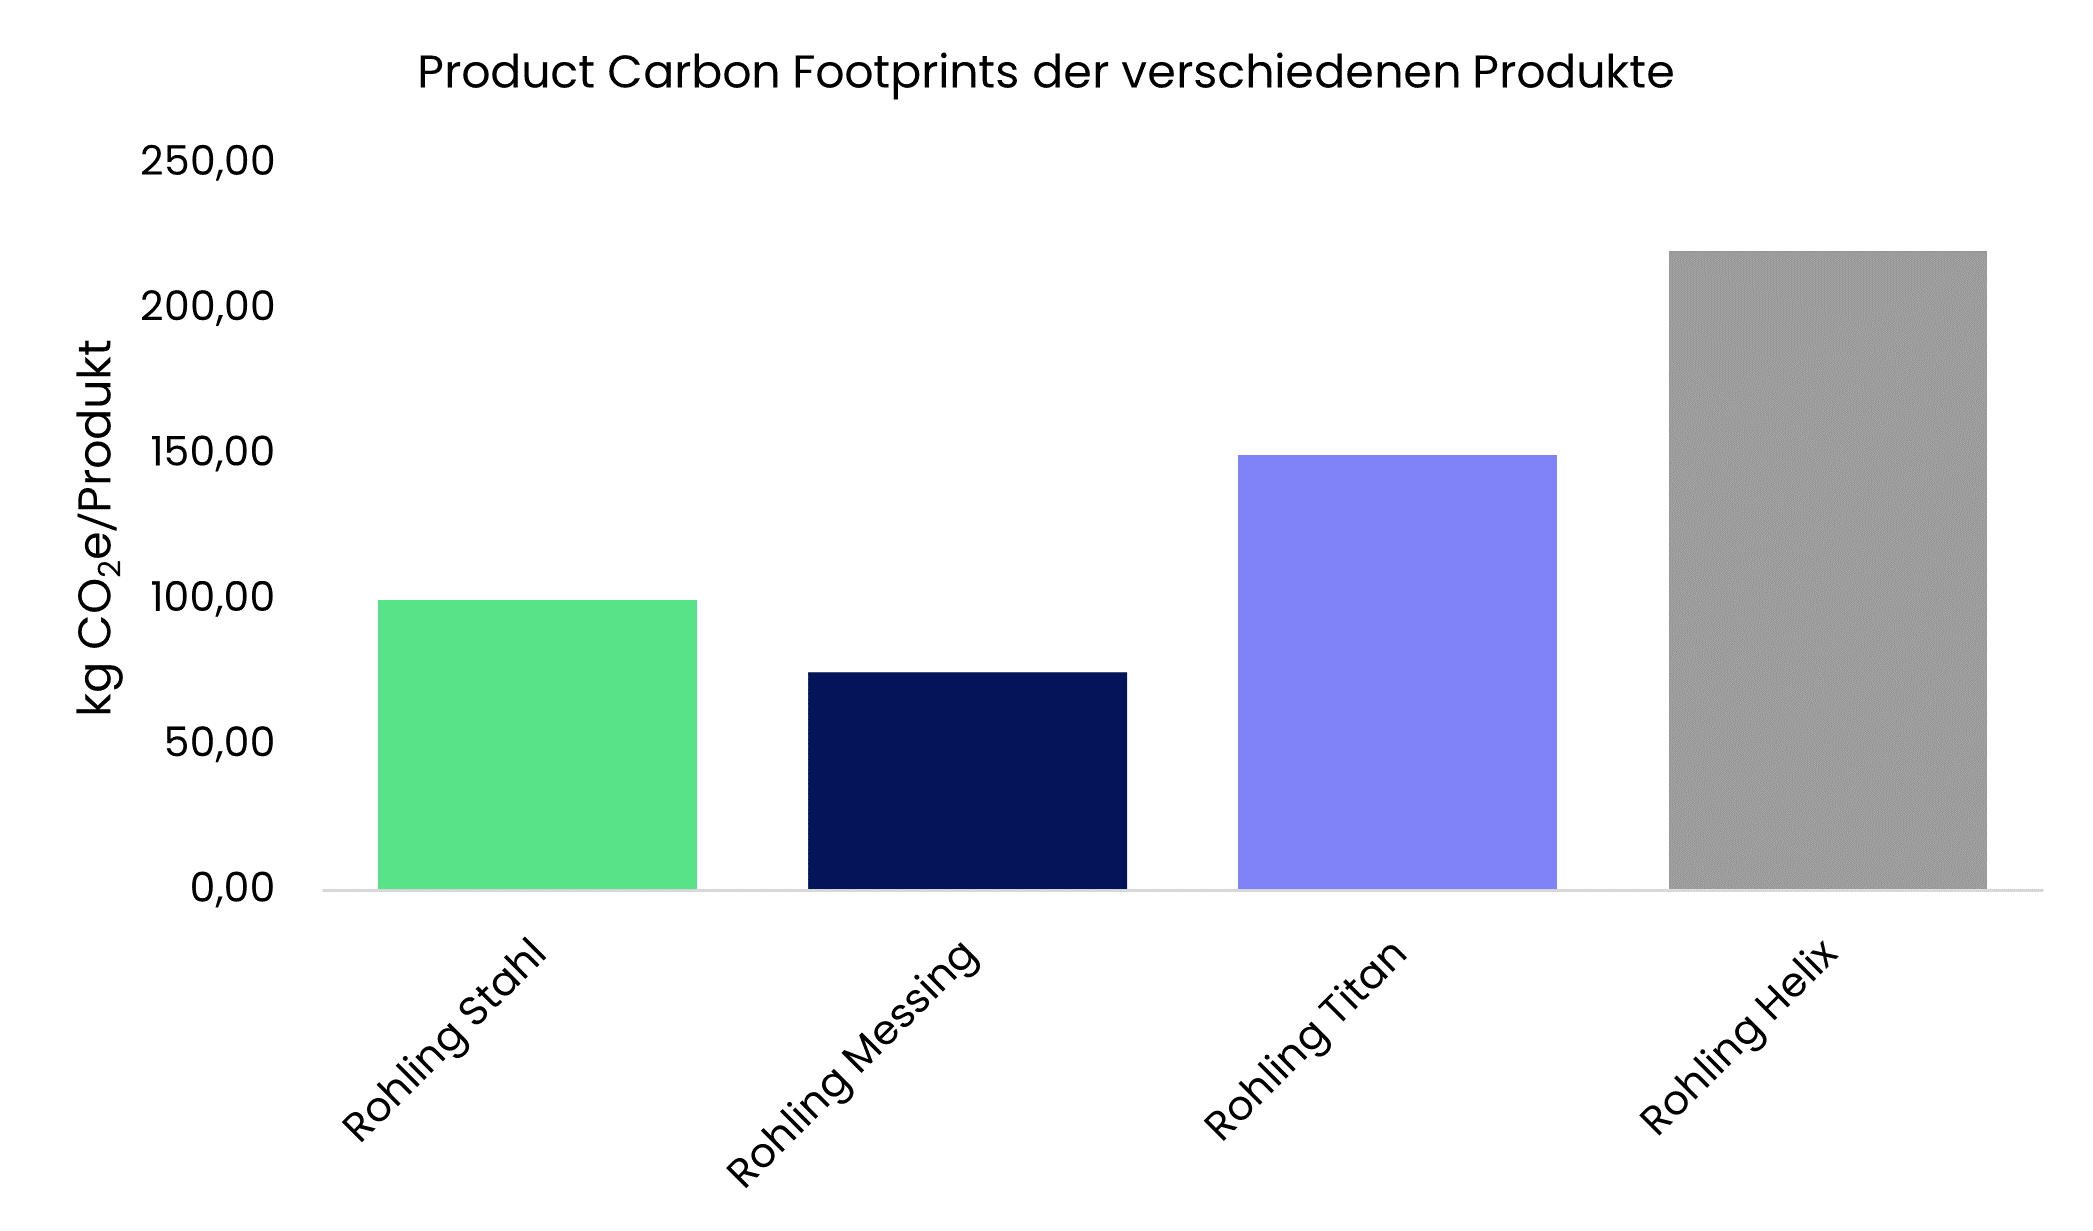 /assets/produkte/sustainability&_product_carbon_footprint_vier_produkte.png